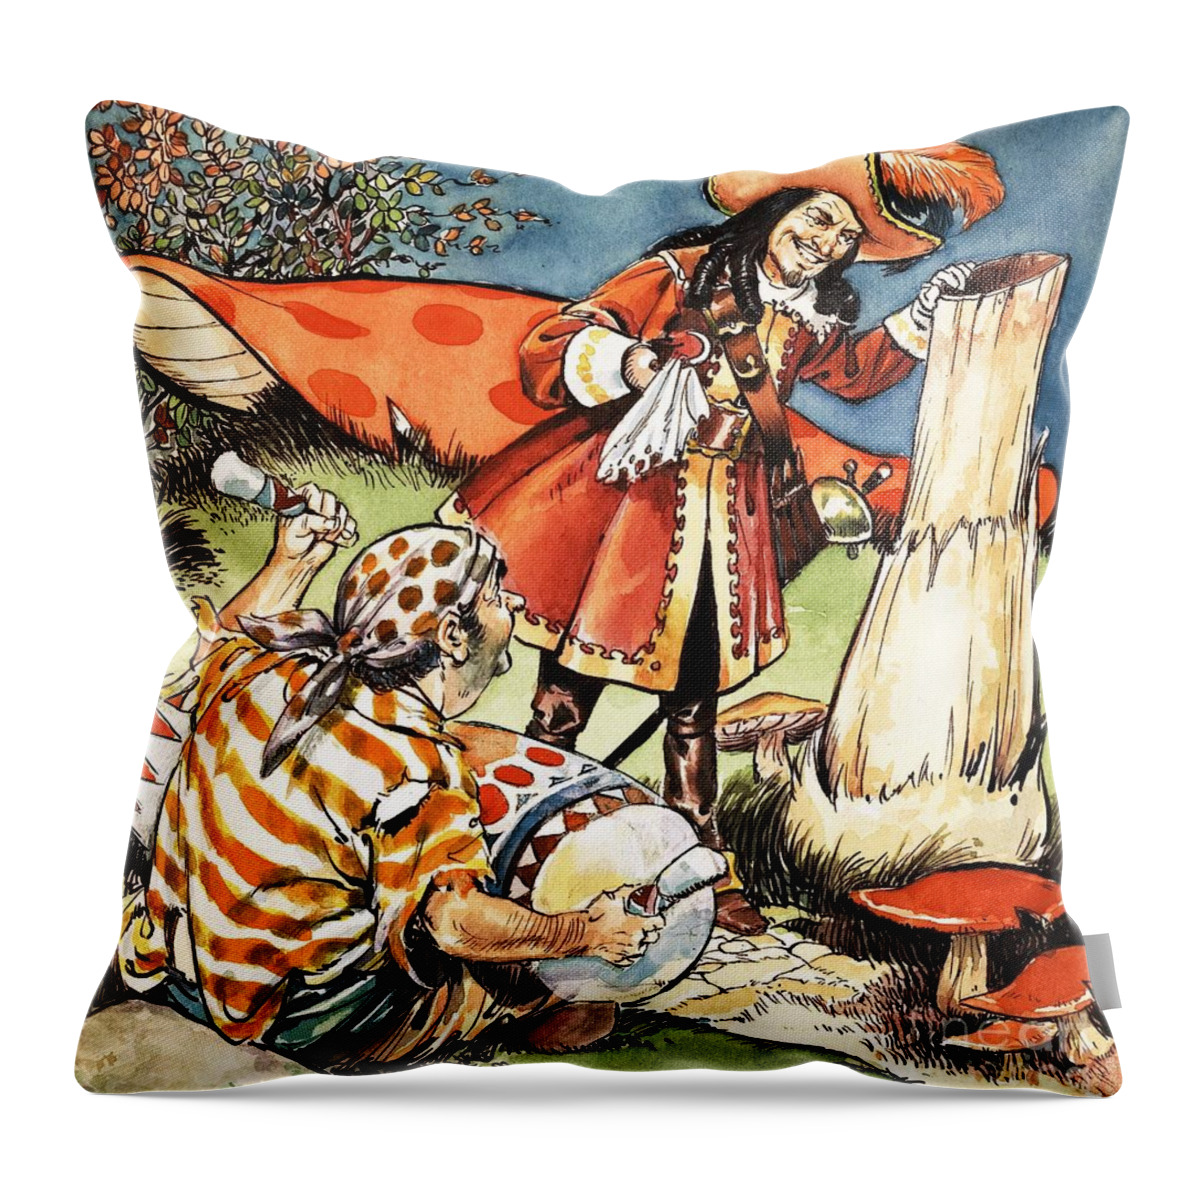 Drum Throw Pillow featuring the painting Peter Pan And Wendy by Nadir Quinto